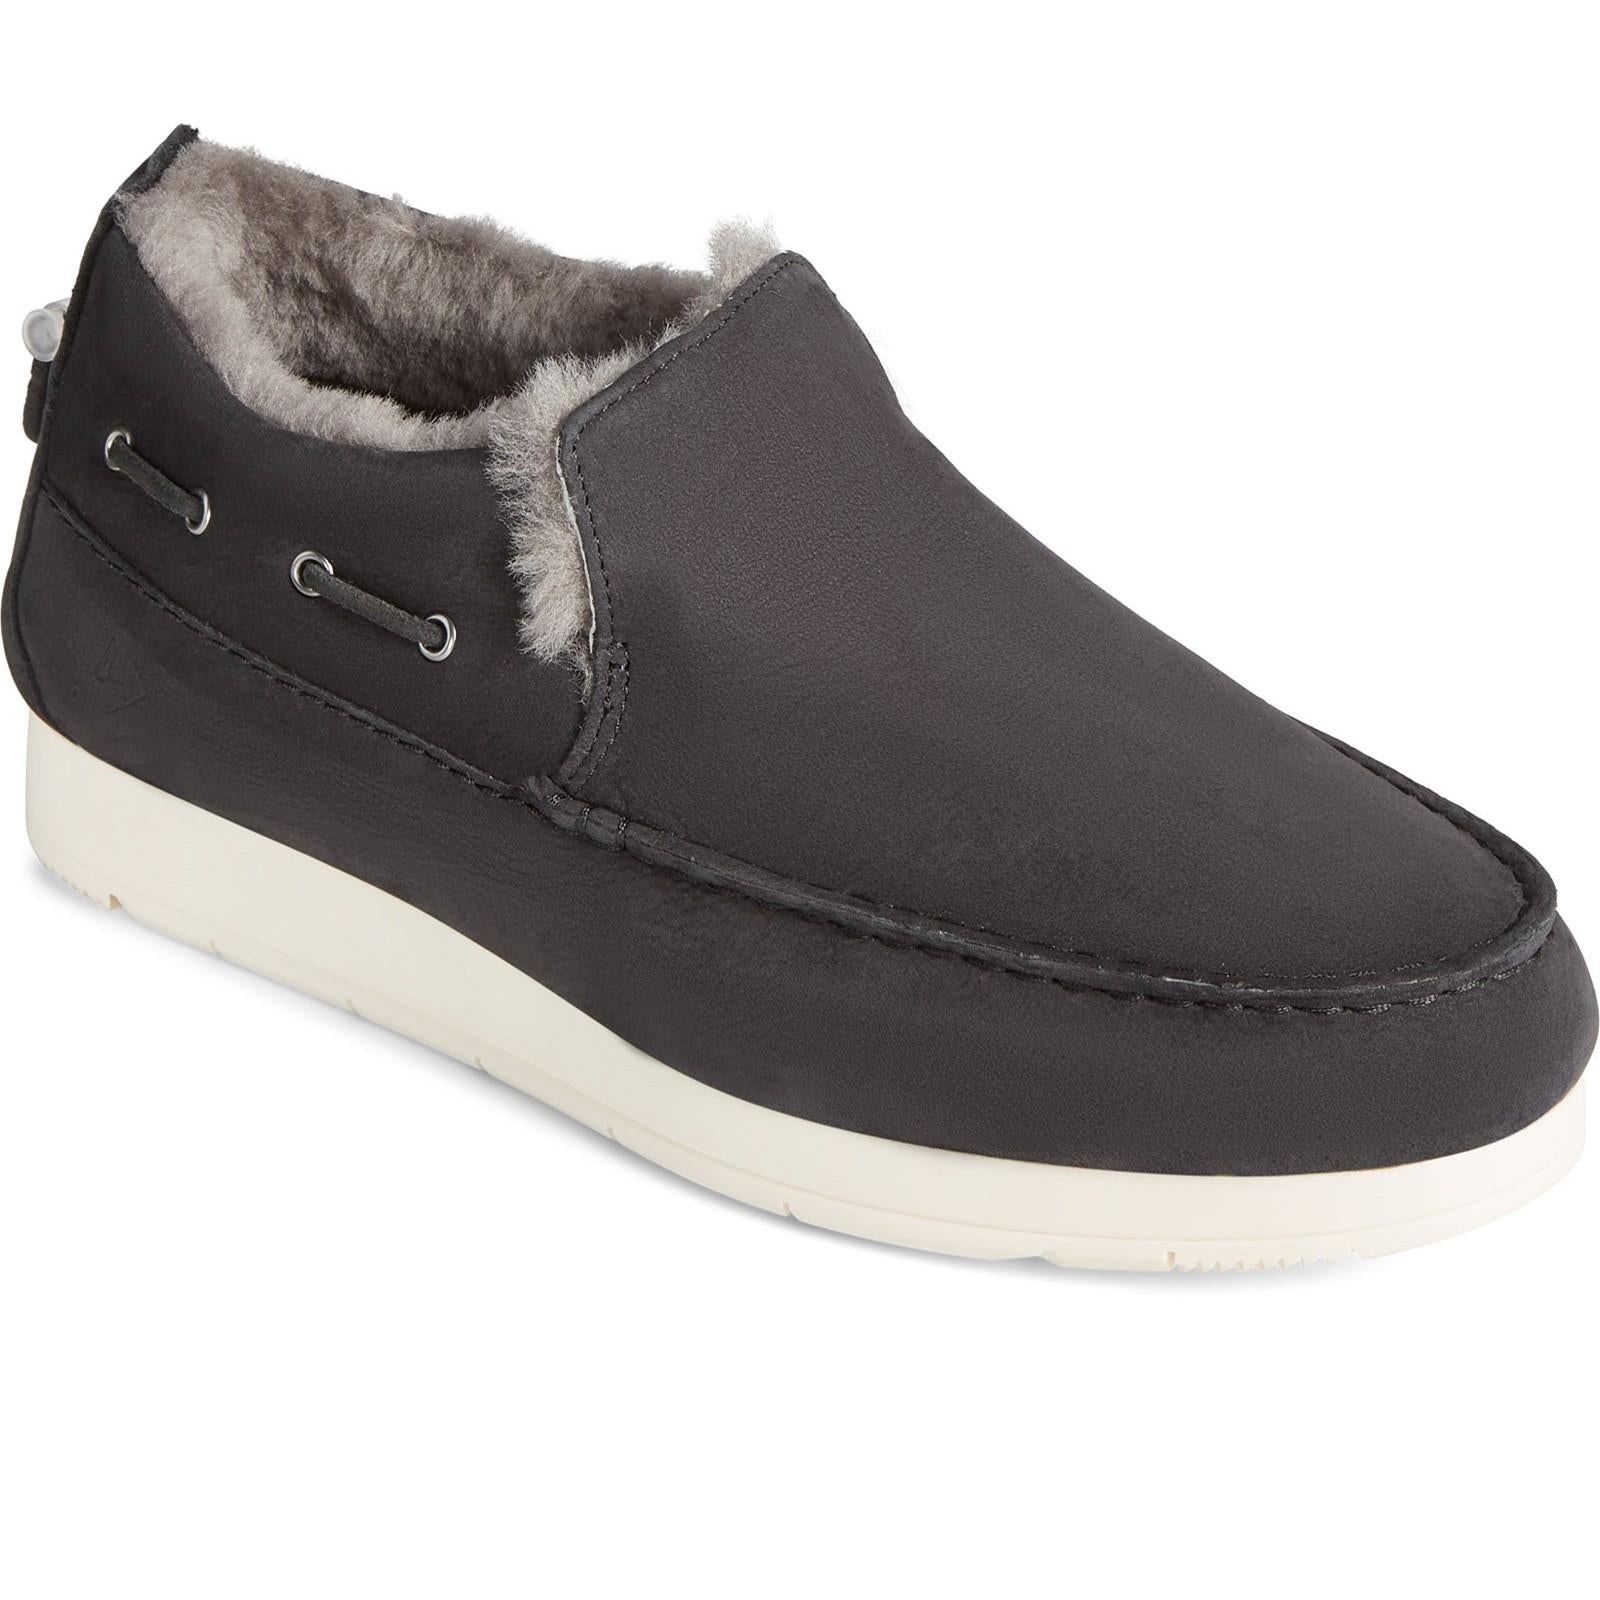 Sperry Top-sider Moc-Sider Winter Slip On Shoes